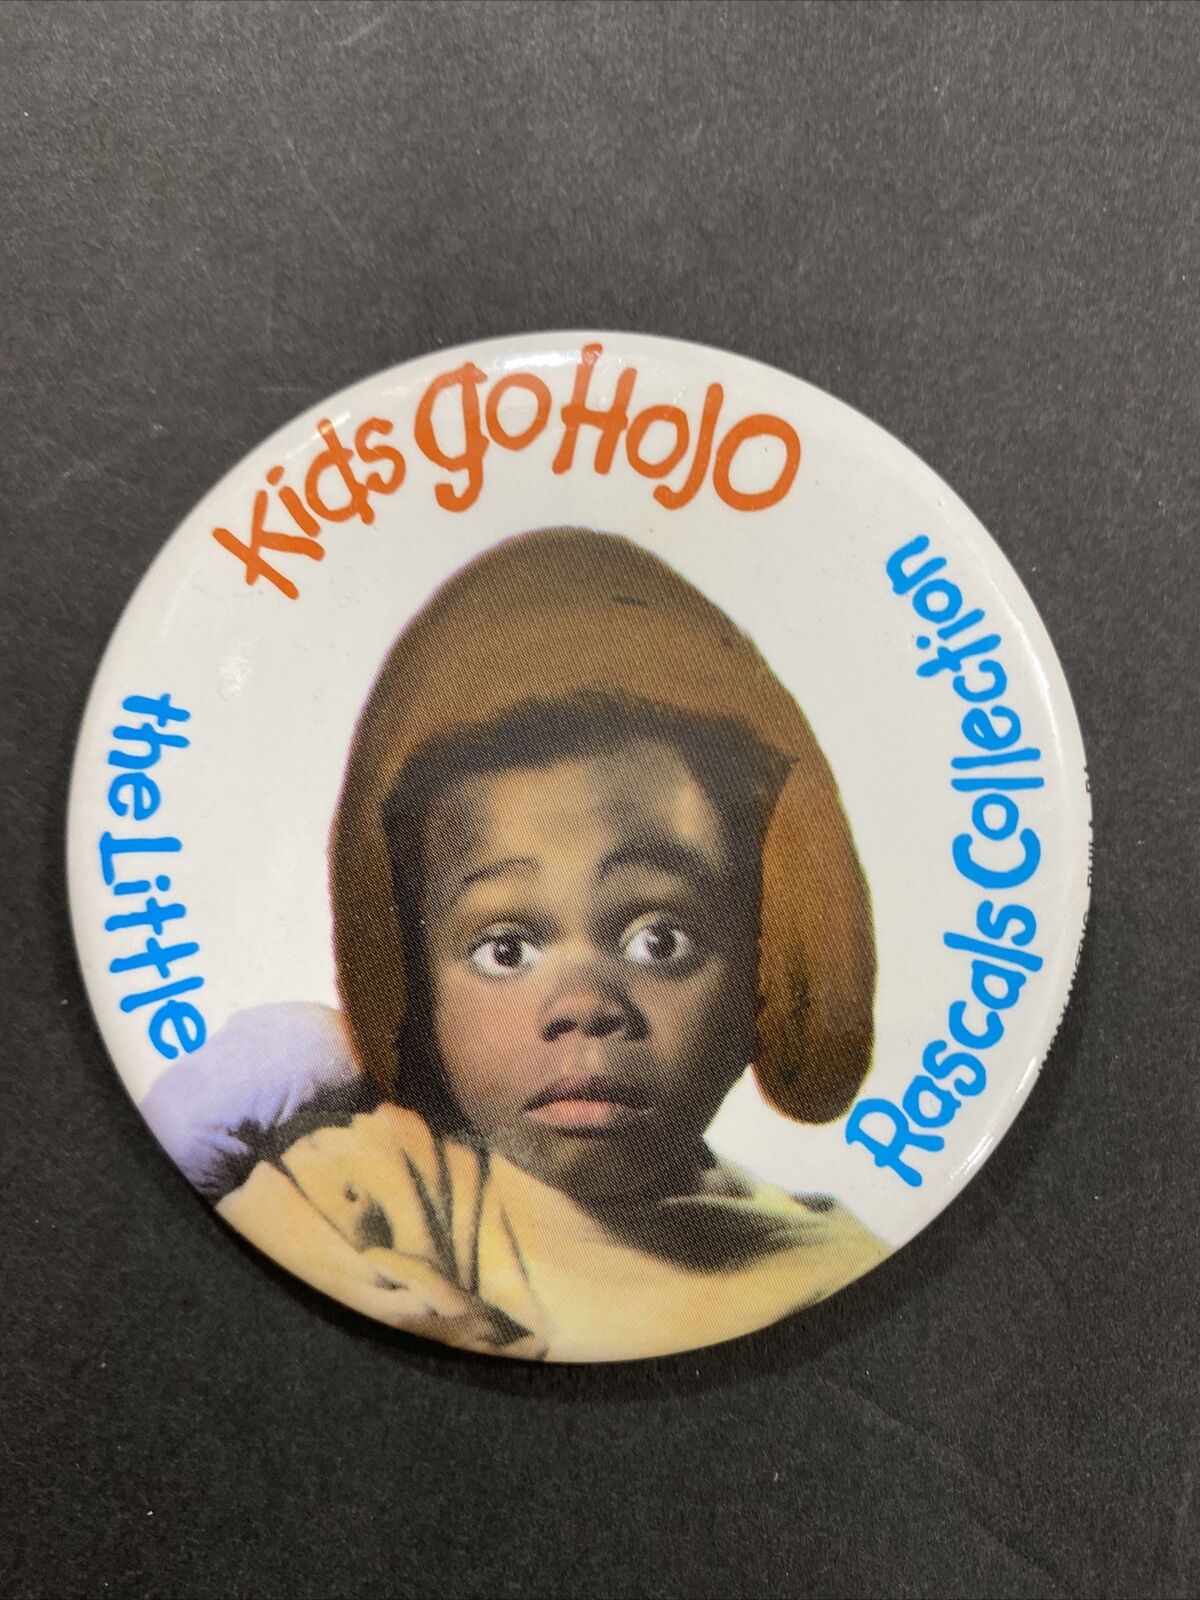 Vintage Little Rascals Buckwheat Our Gang Collection Kids Go Hojo Button Pin